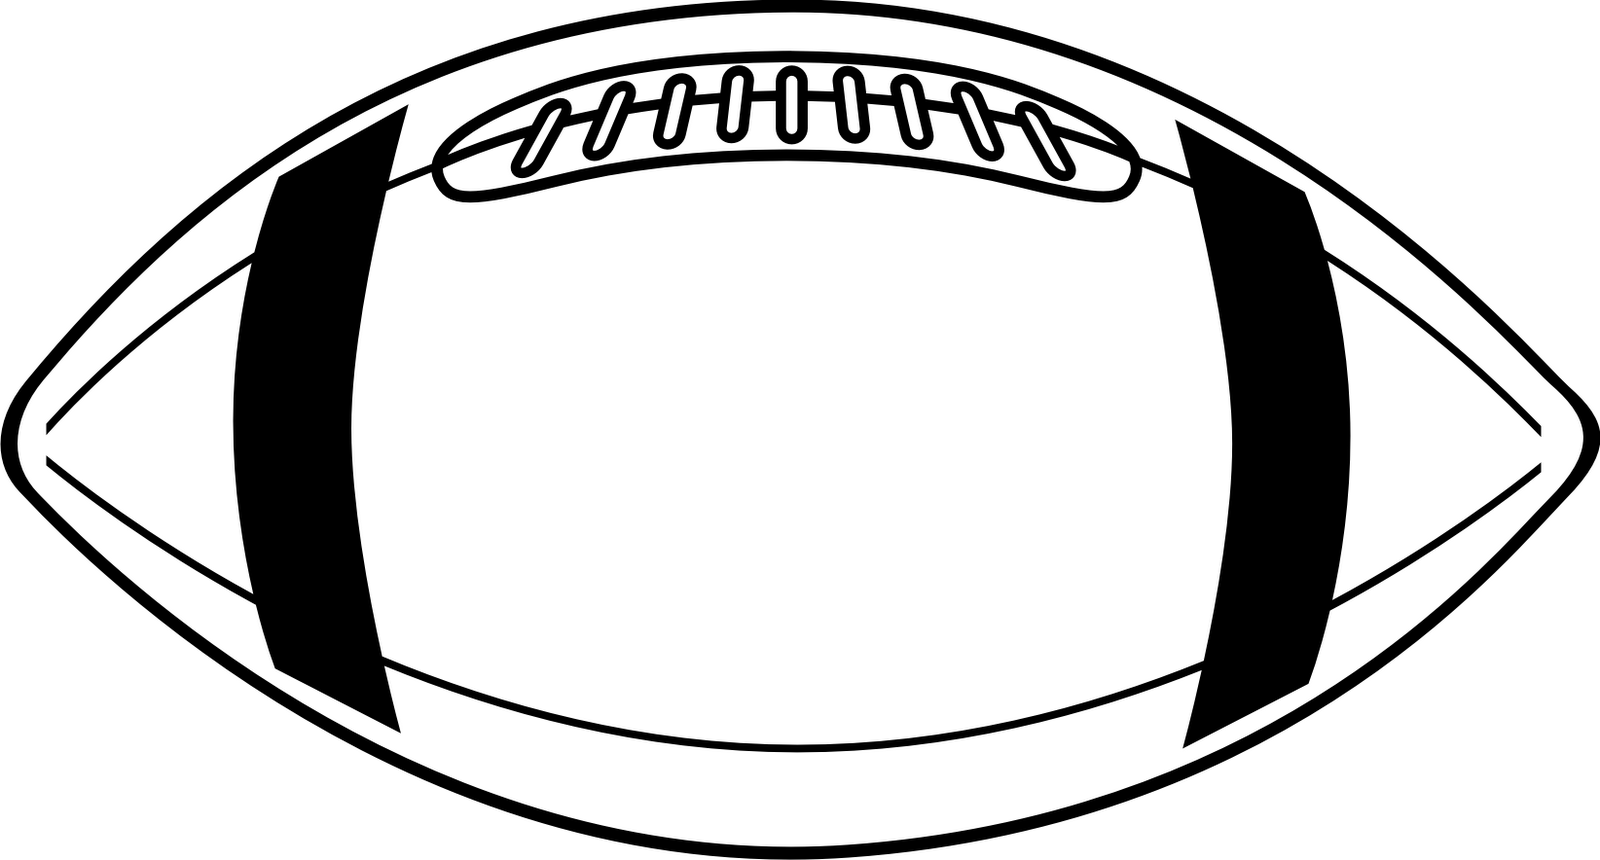 American Football Clipart Black And White - Free .